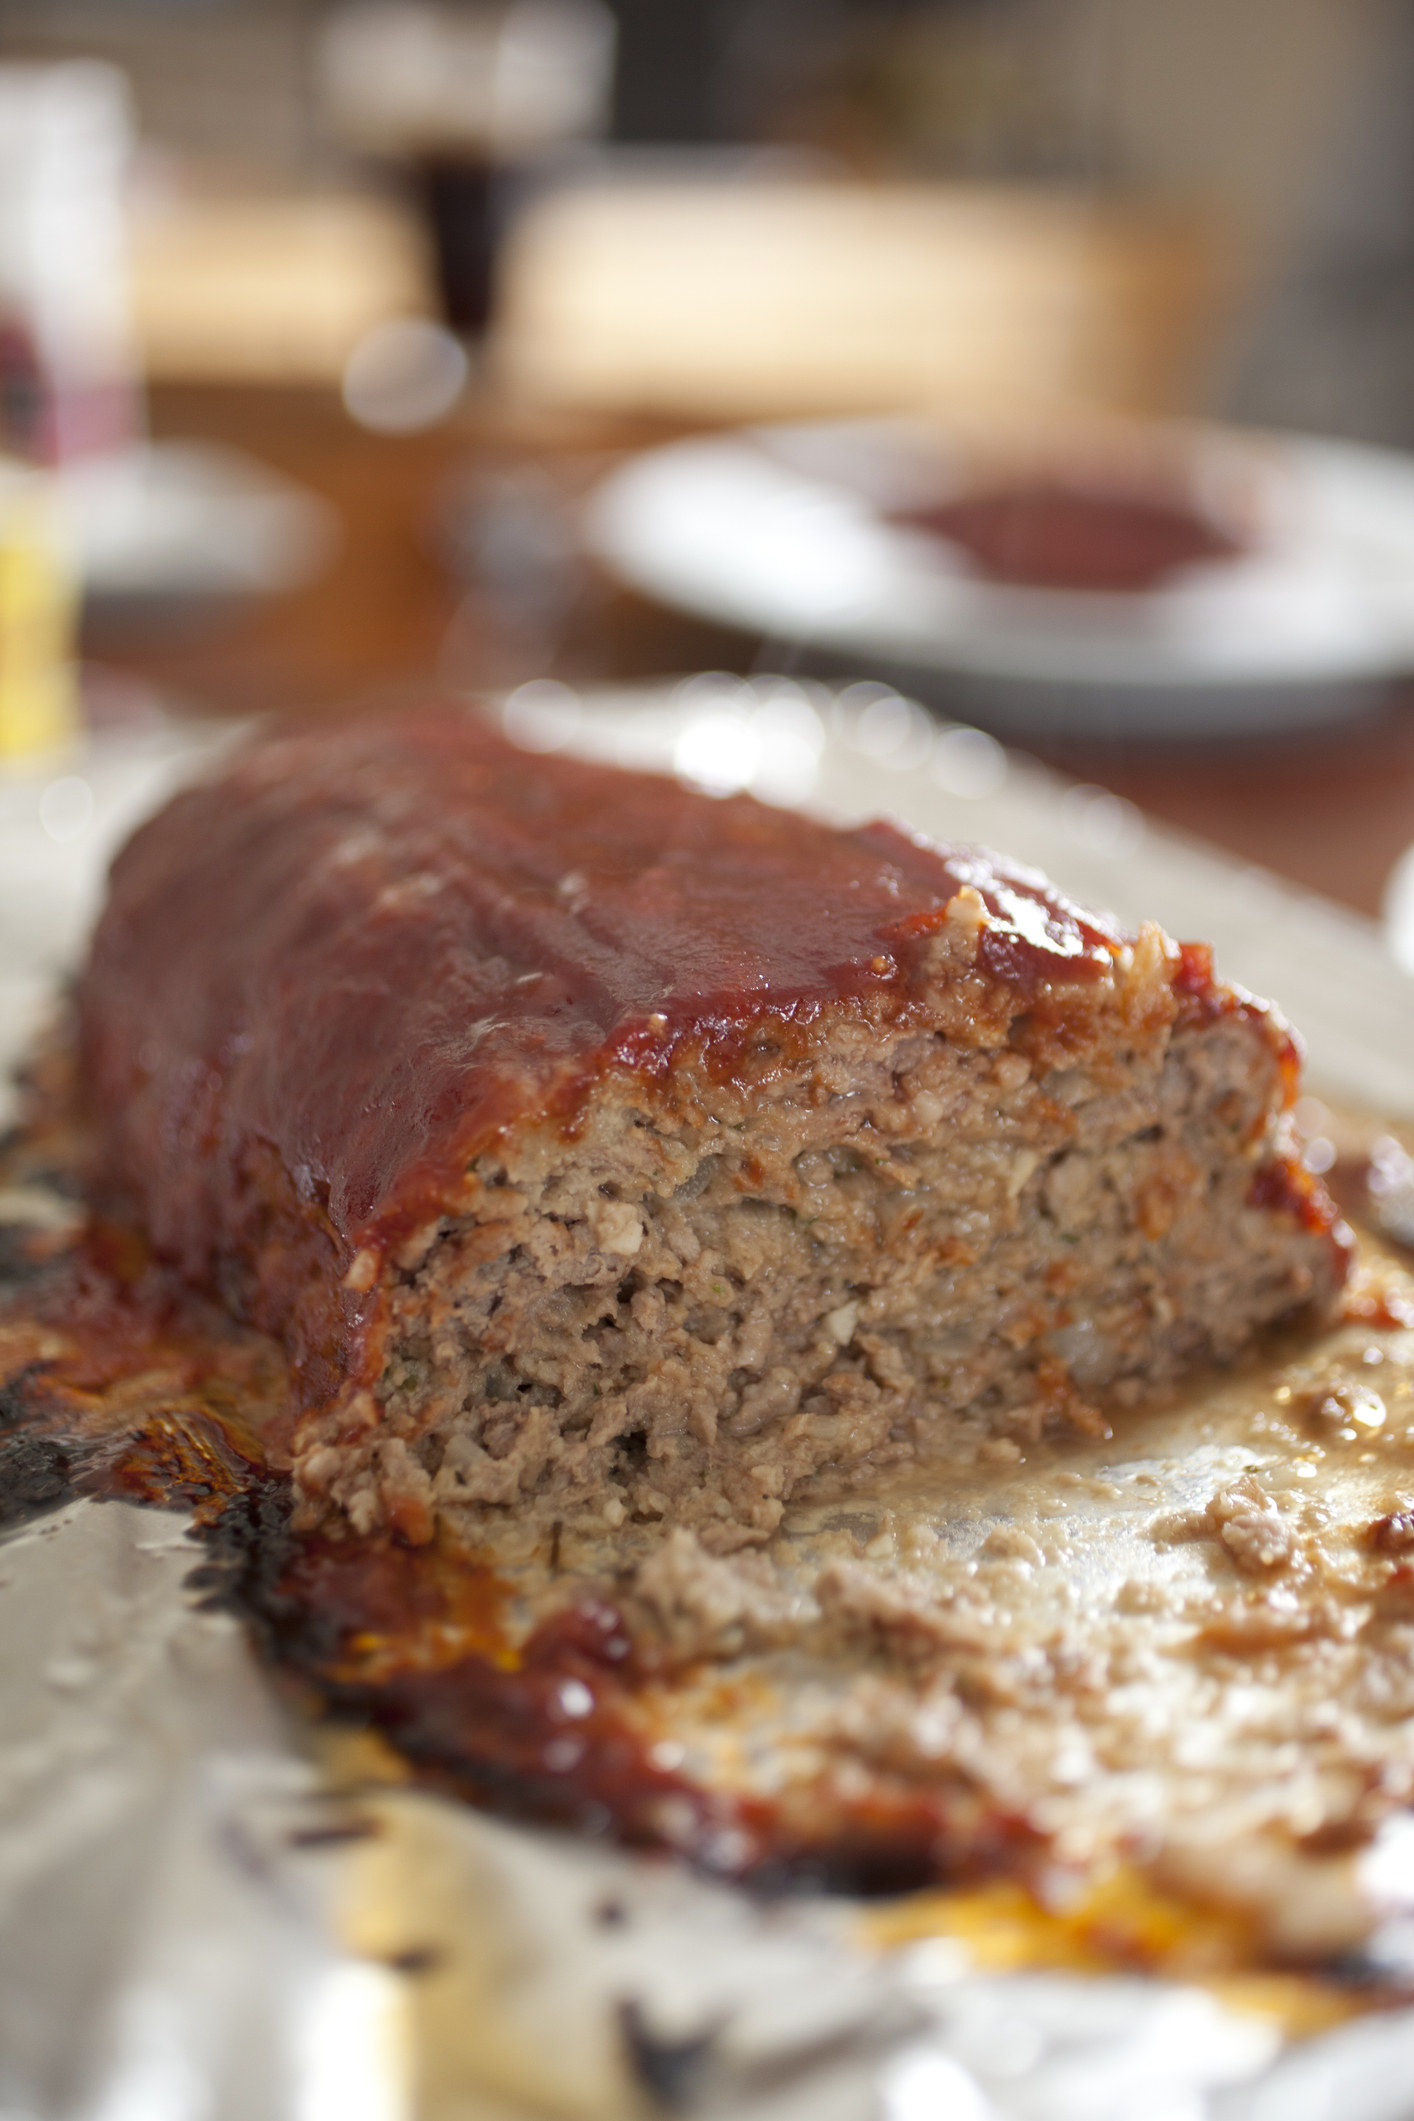 Meatloaf at a dinner table